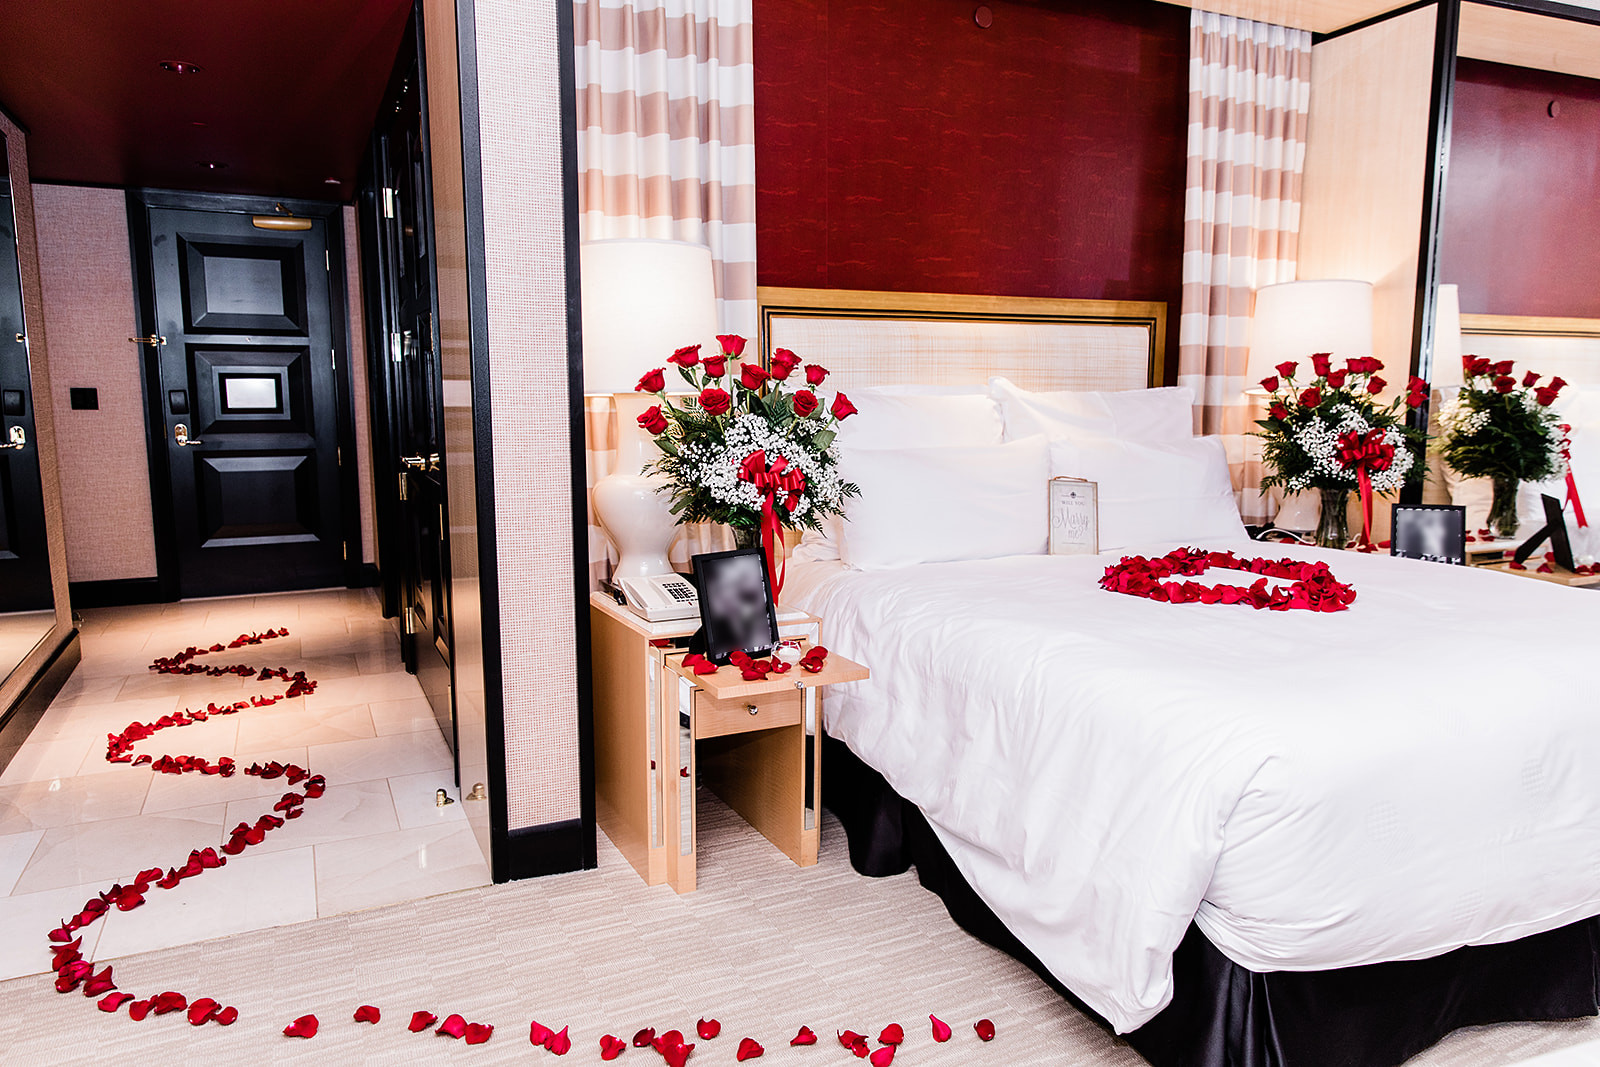 Vegas marriage proposal in hotel room with rose petals leading to bed with ...